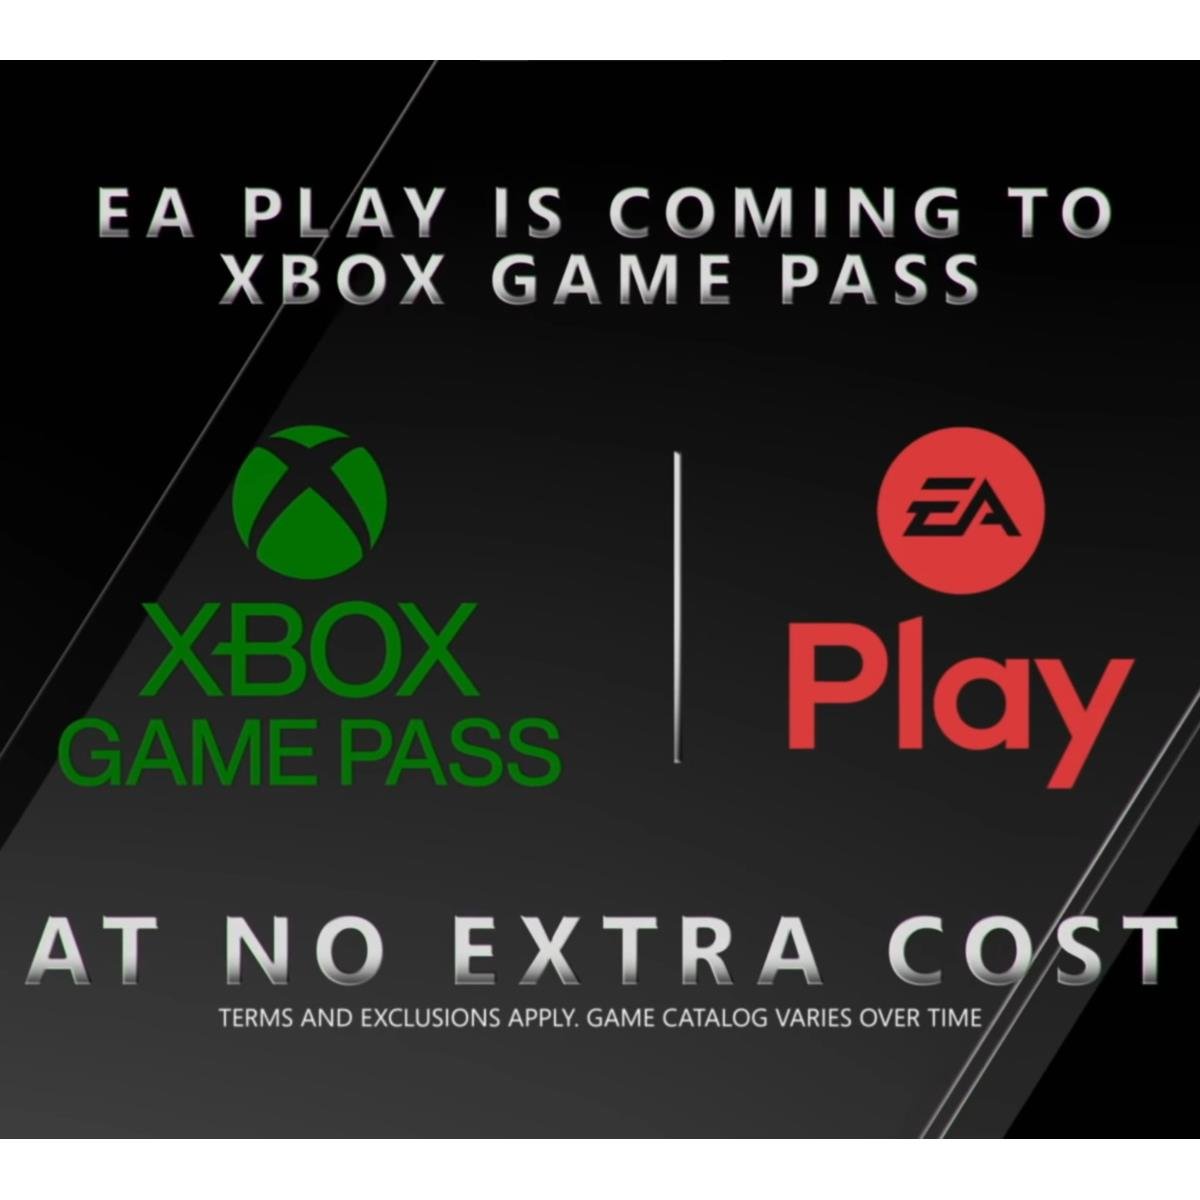 EA Play Comes to Xbox Game Pass on Console, Android and PC